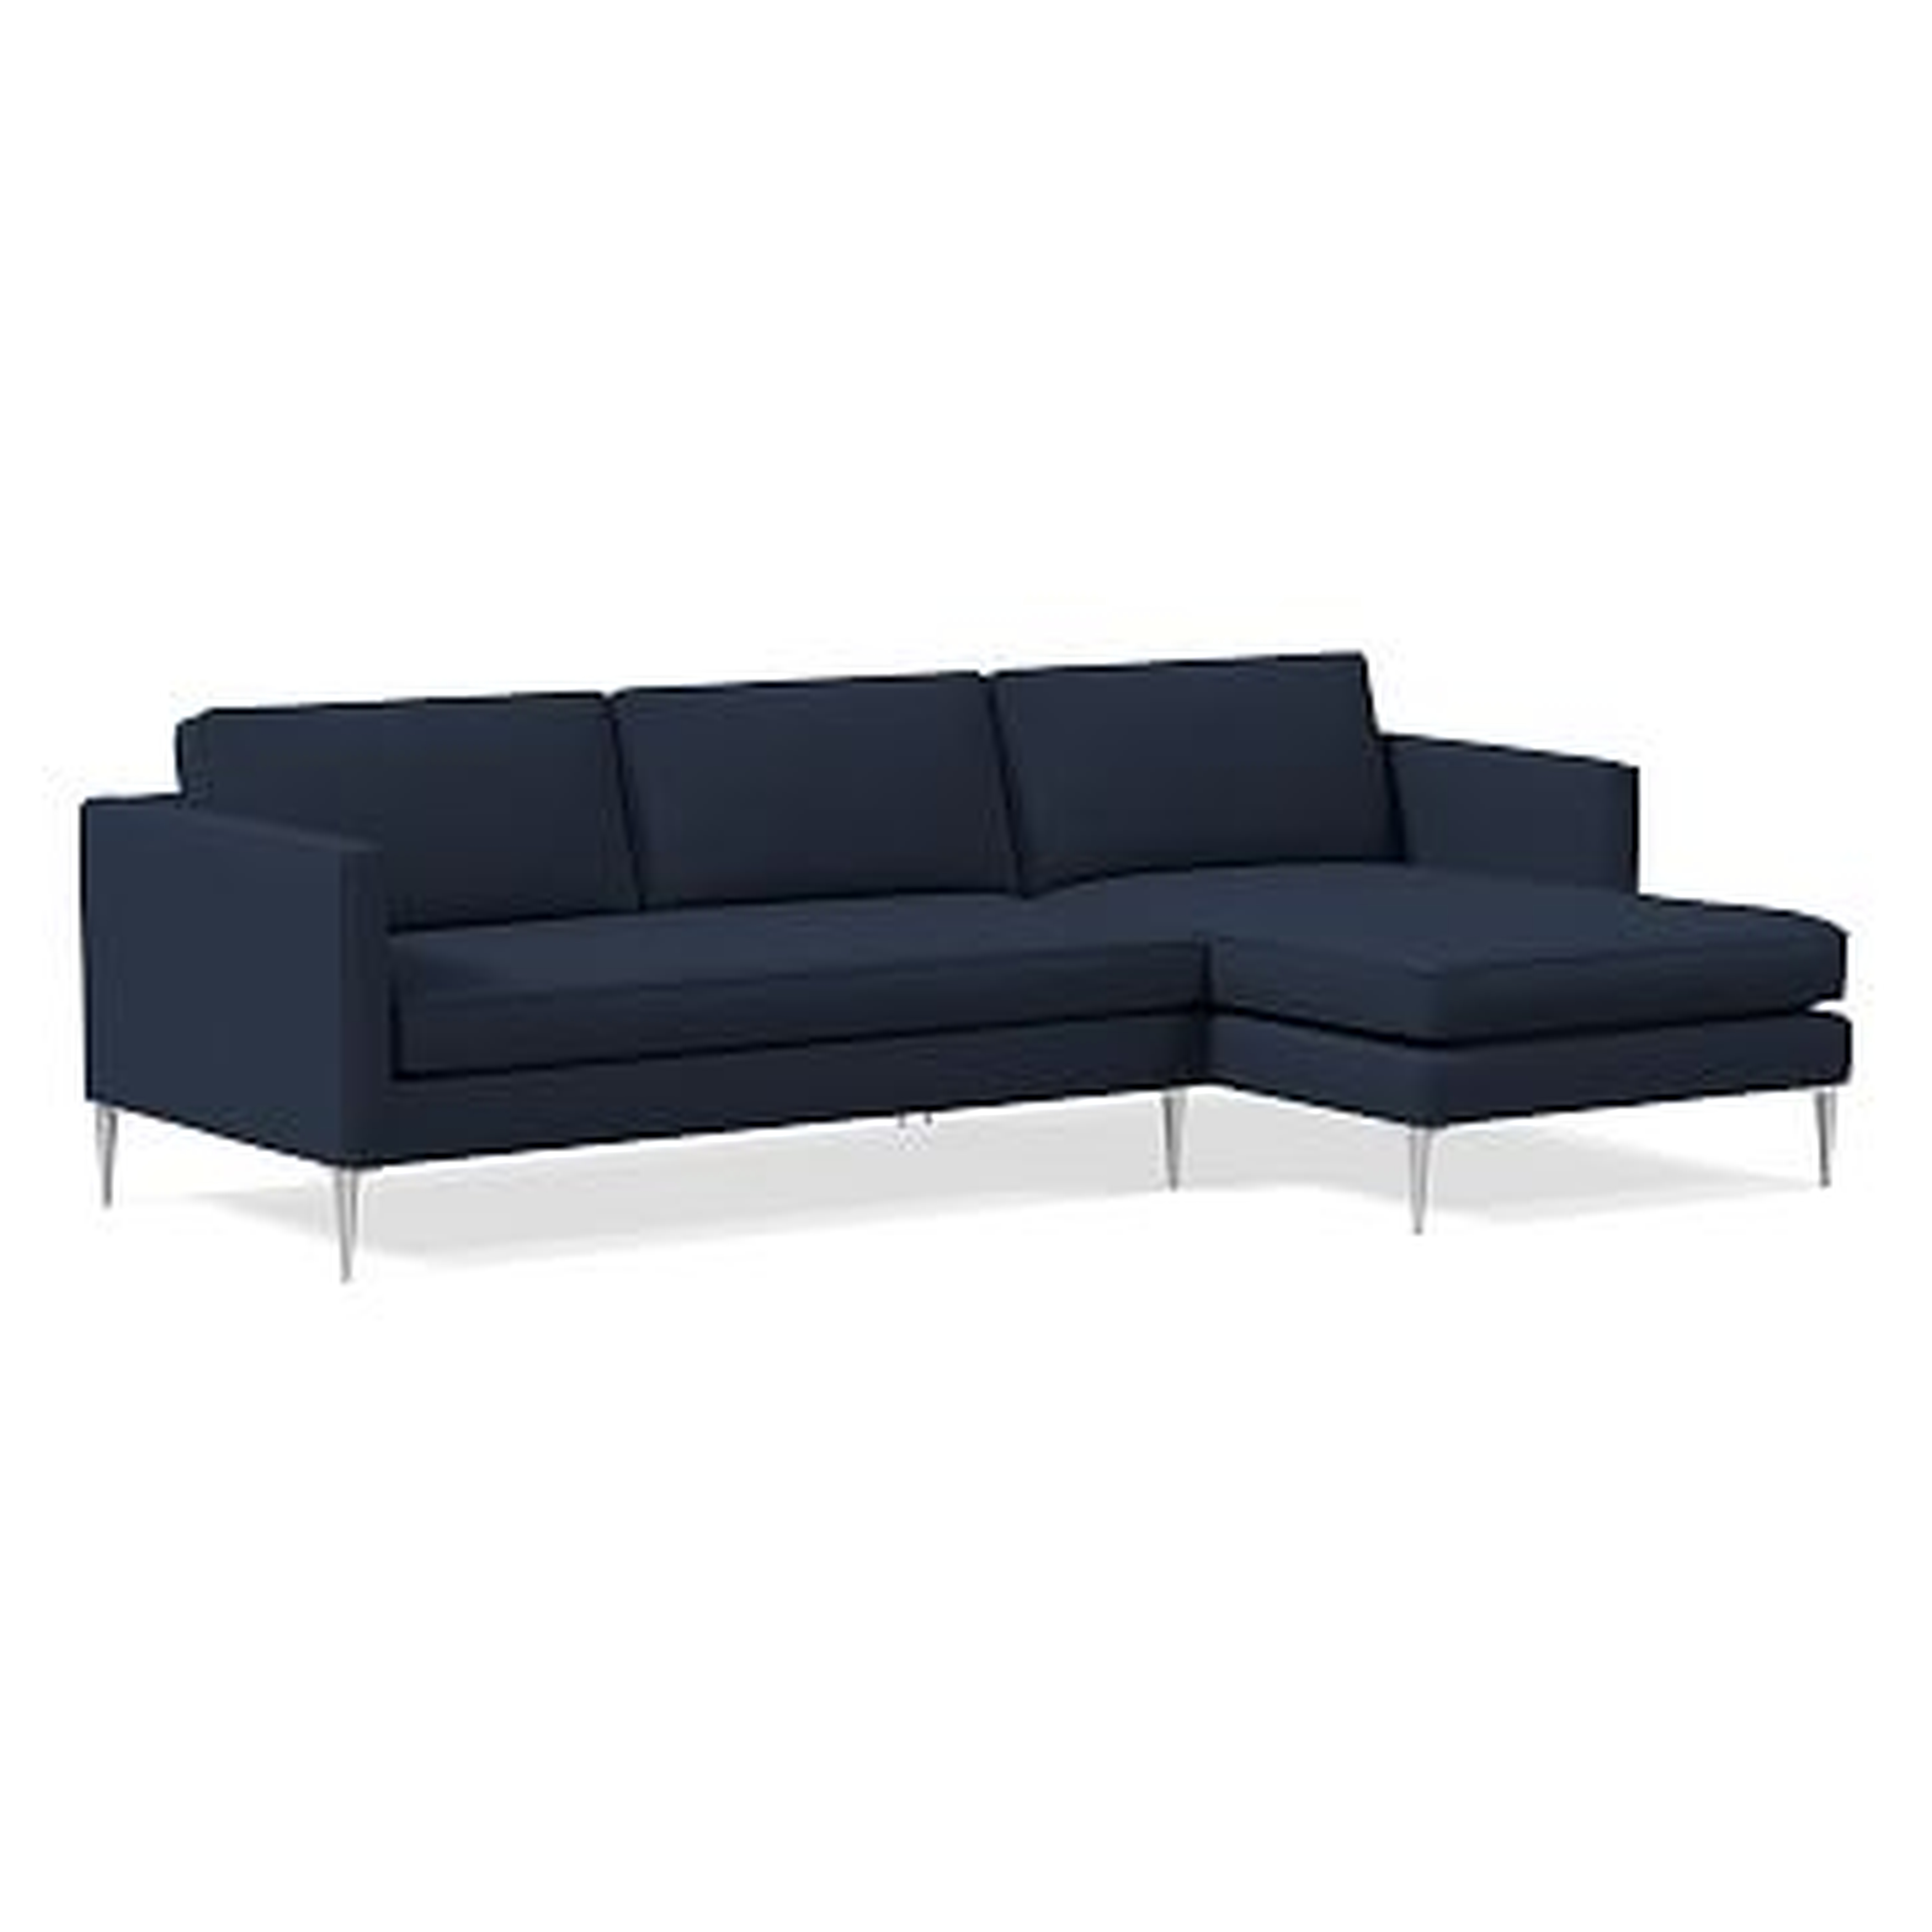 Harris Loft Sectional Set 01: Left Arm Sofa, Right Arm Chaise, Poly, Twill, Regal Blue, Polished Stainless Steel - West Elm